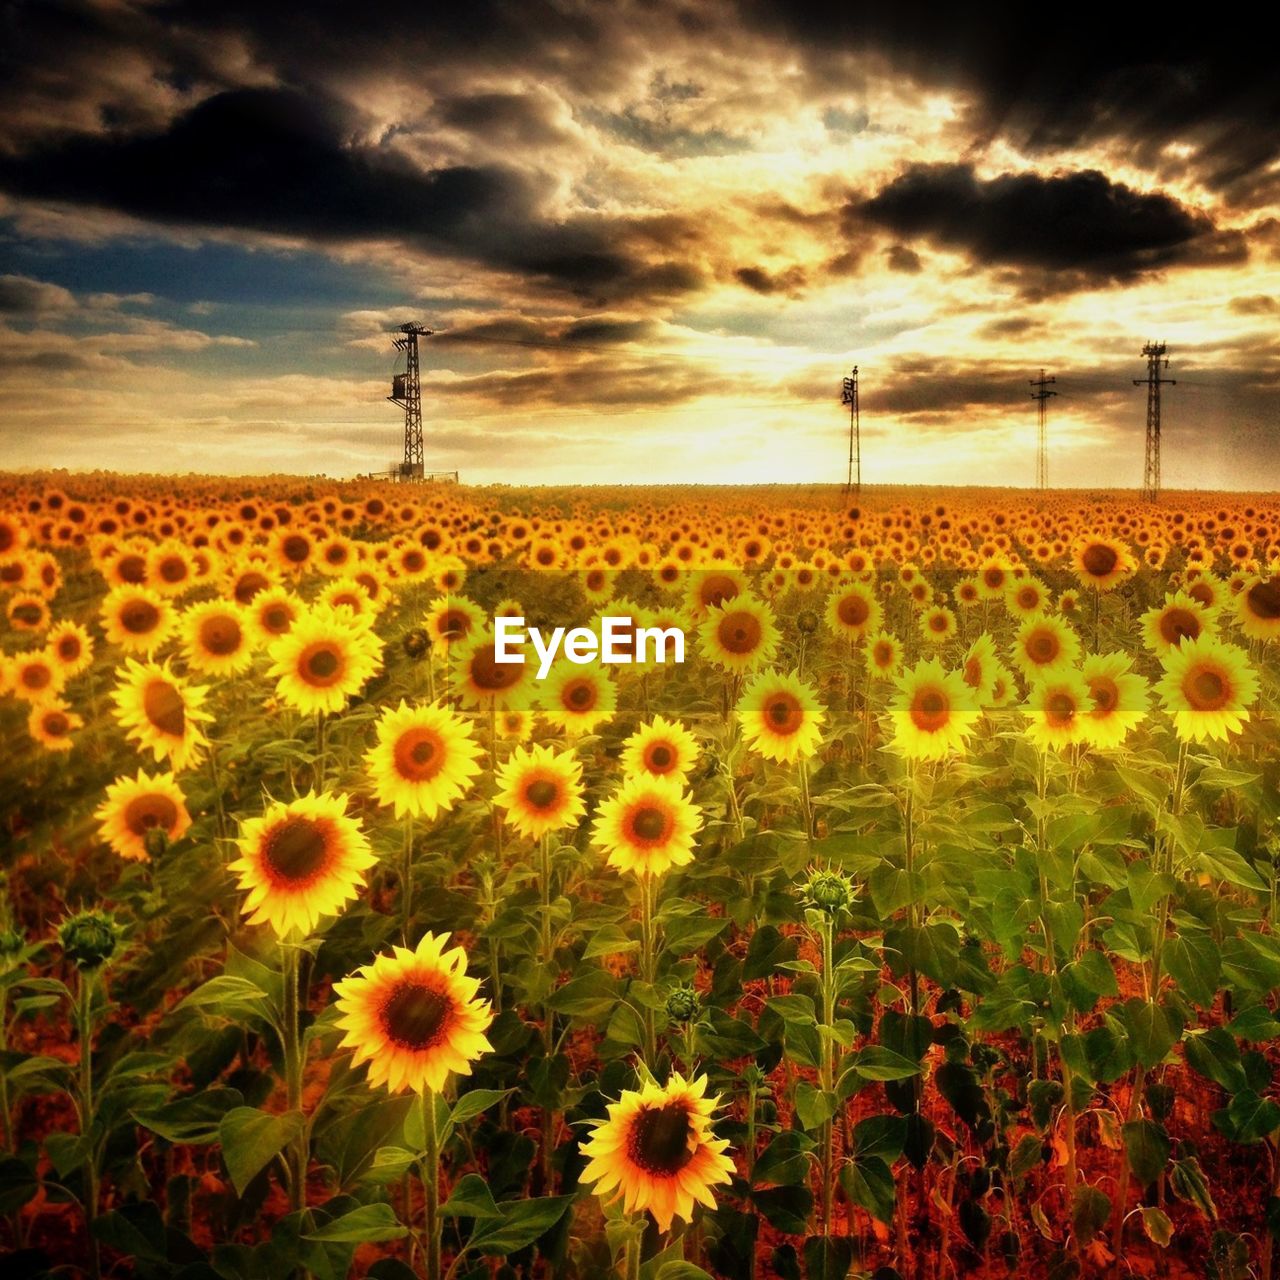 SCENIC VIEW OF SUNFLOWER FIELD AGAINST CLOUDY SKY DURING SUNSET